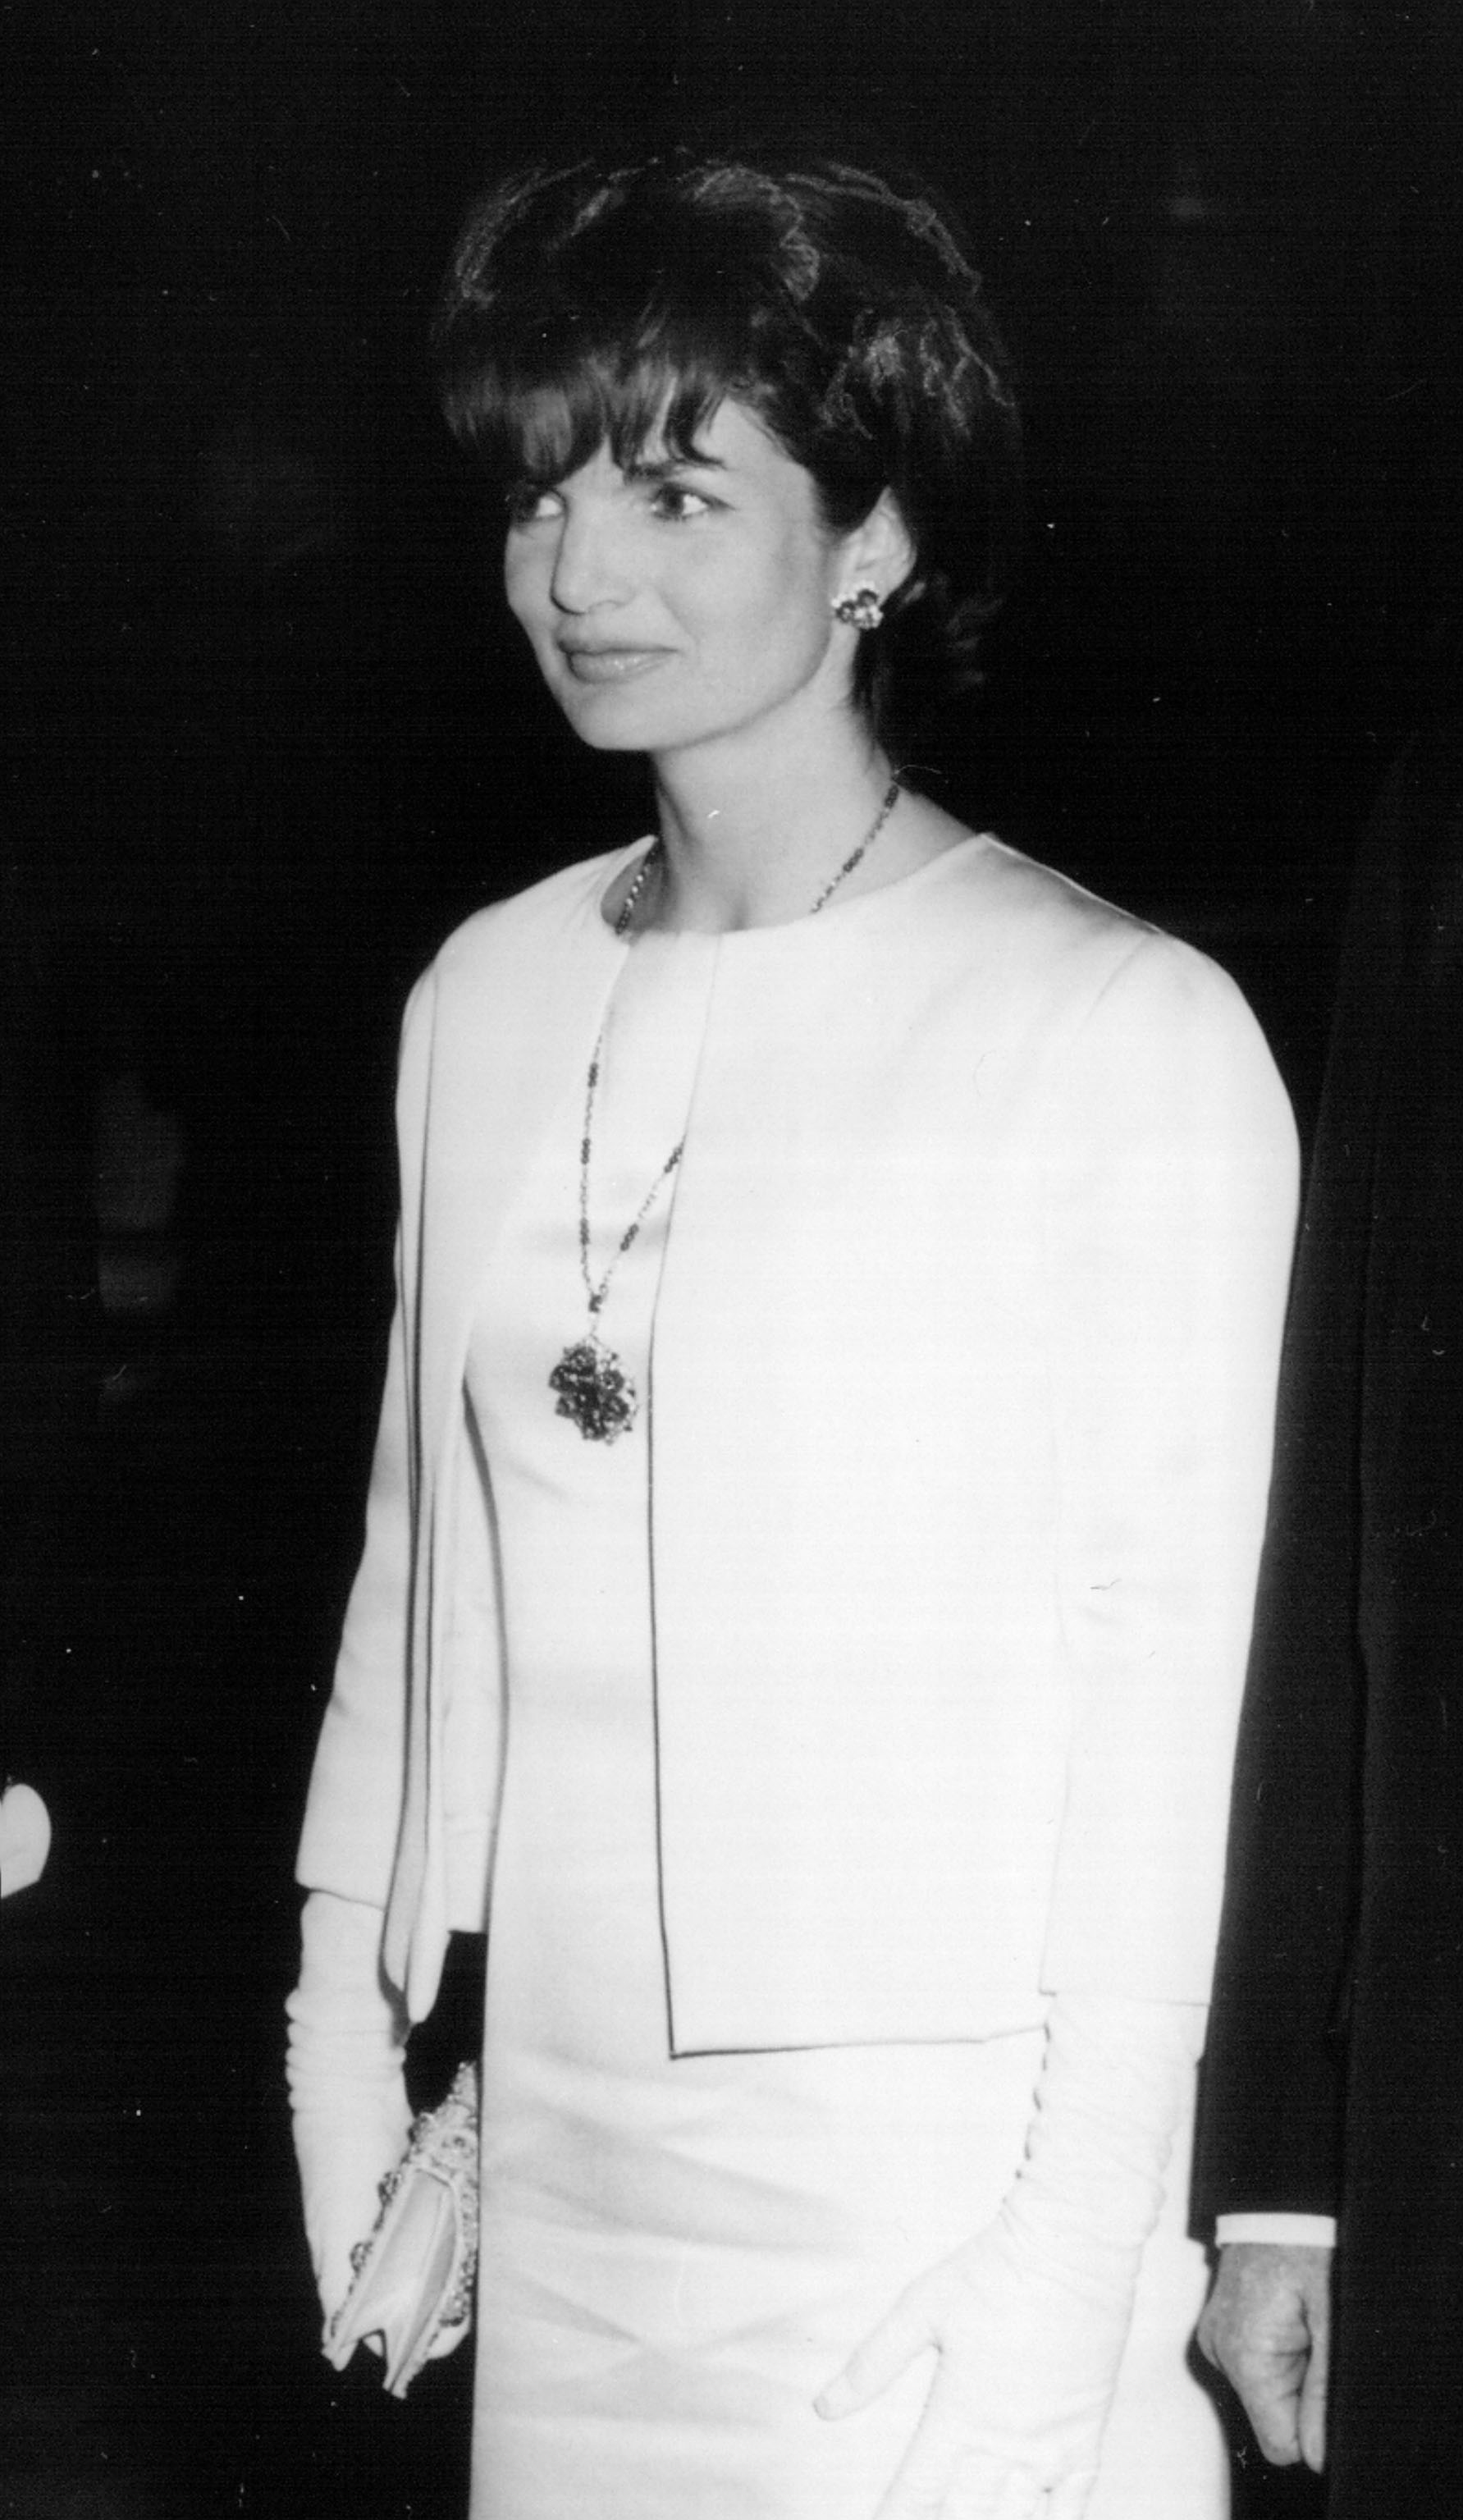 First Lady Jackie Kennedy attends a White House Ceremony December 6, 1962. | Source: Getty Images